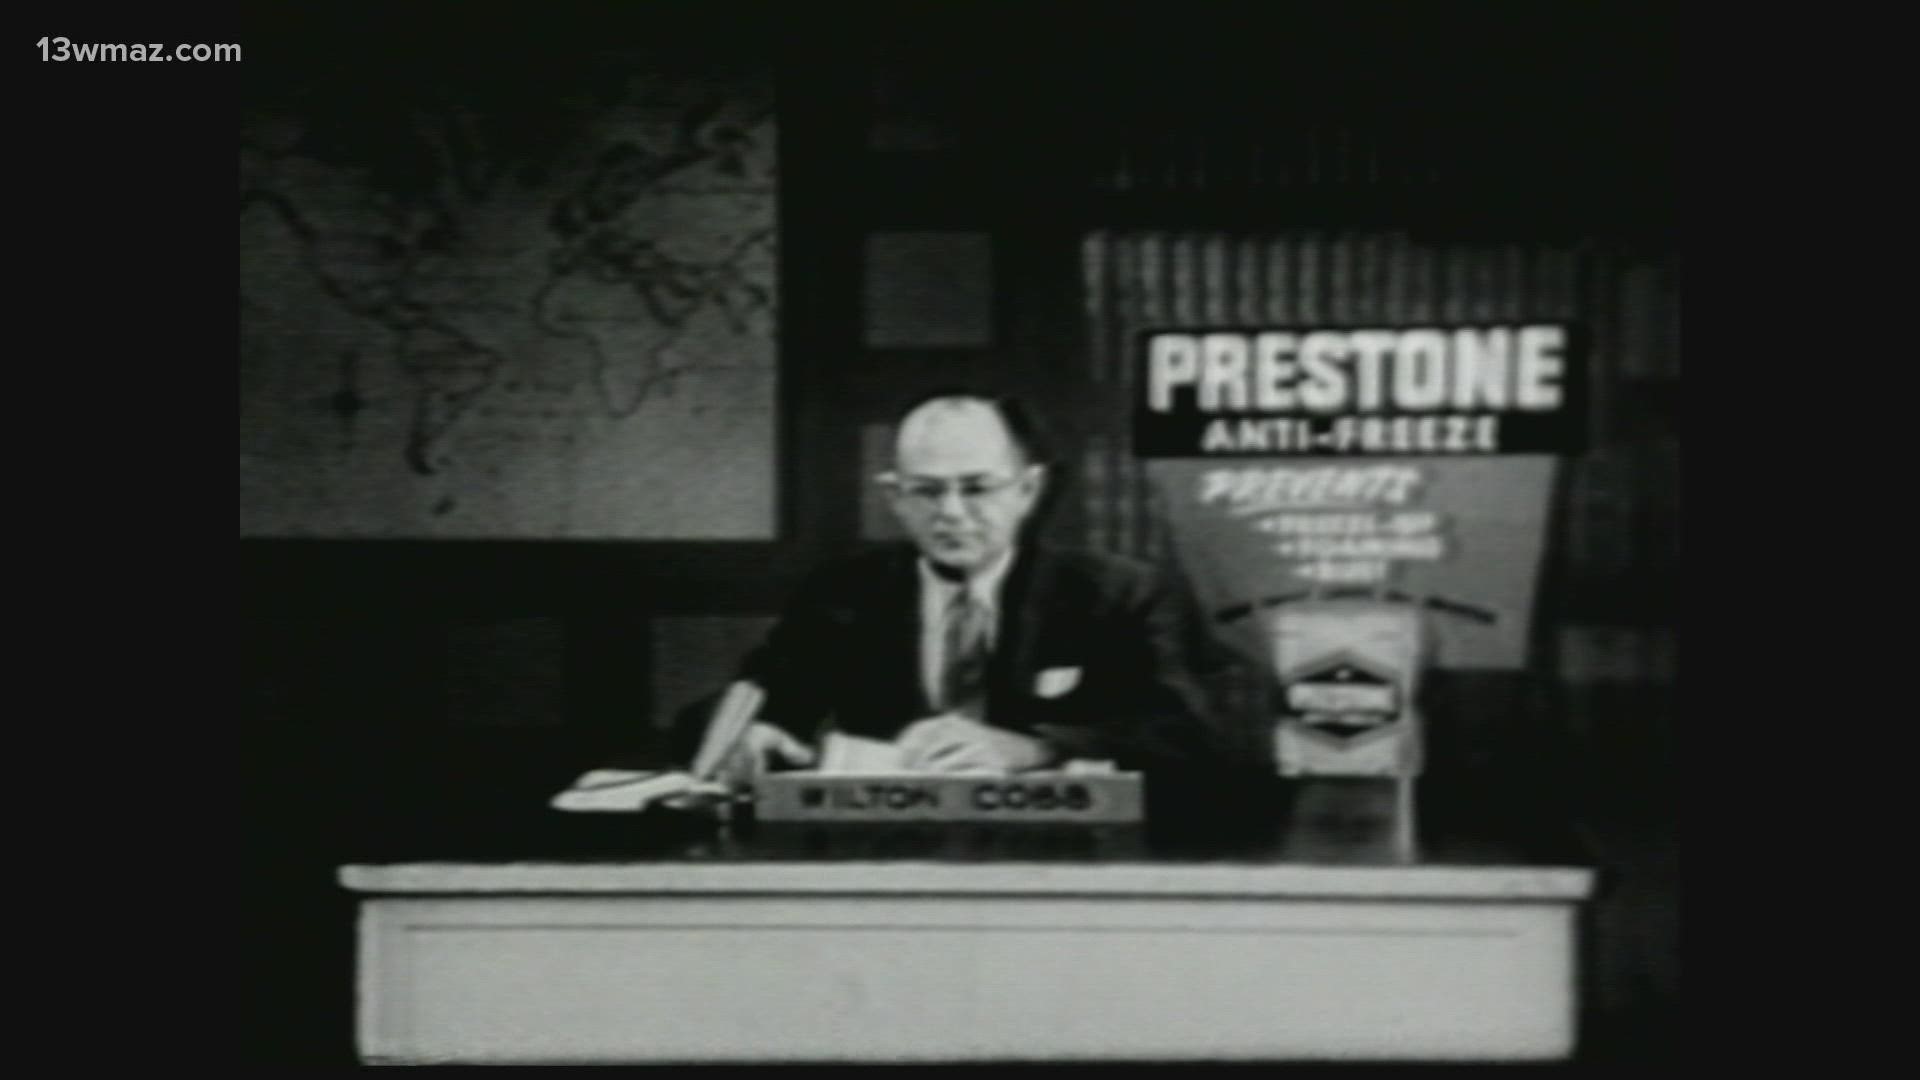 13WMAZ has a rich past and wants to reminisce with stories from previous decades